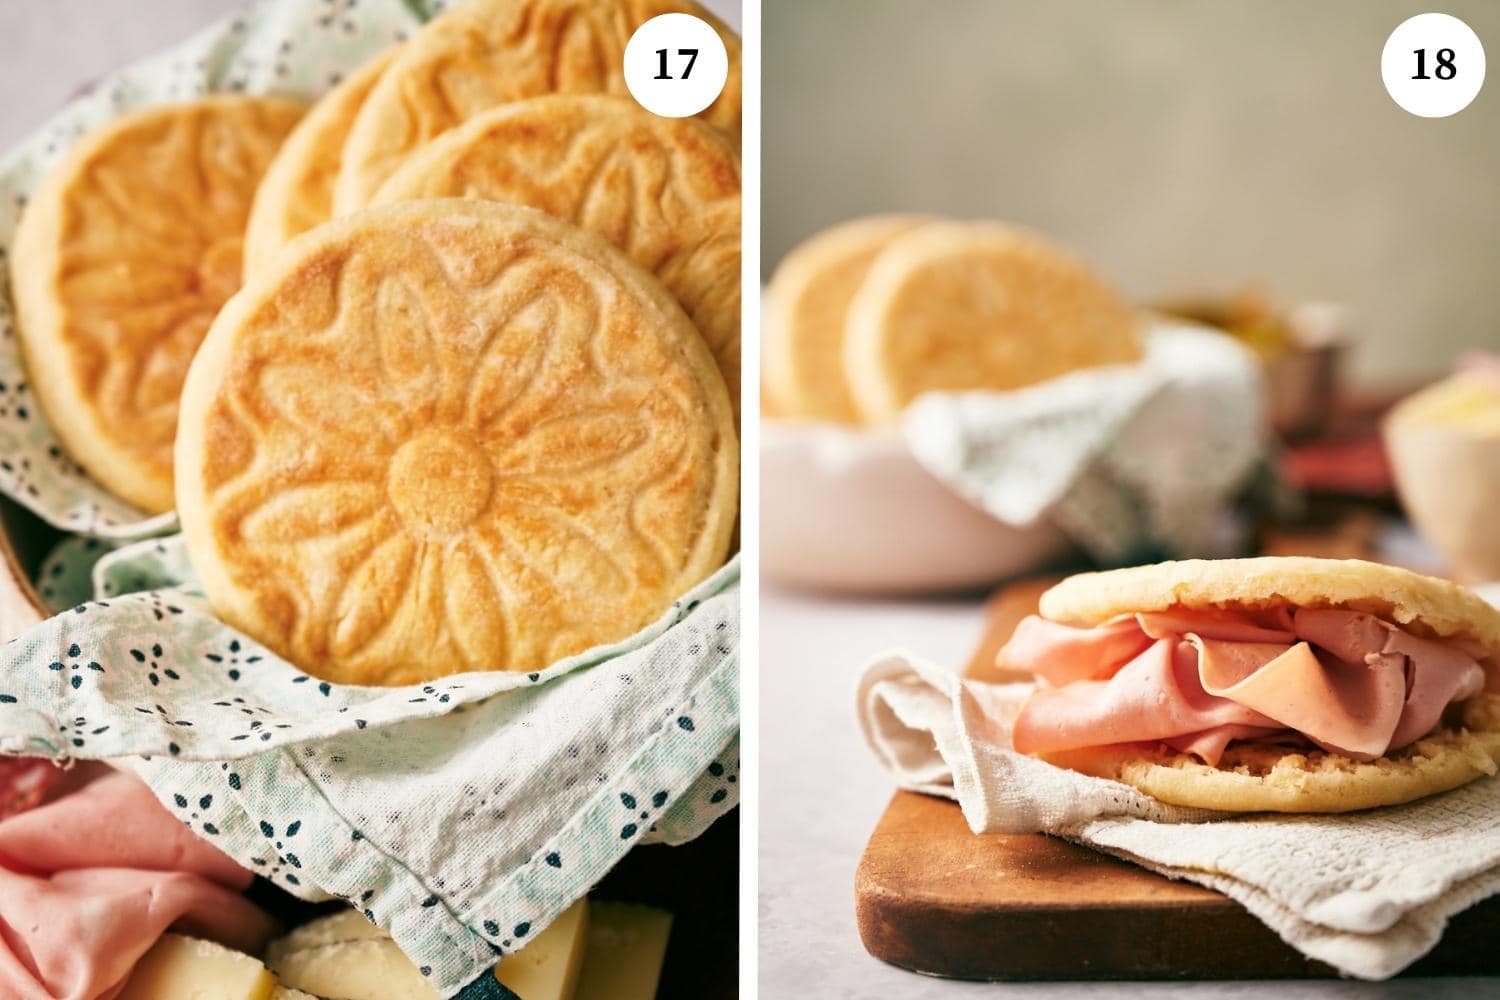 Process of making Tigelle Foccaccine Bread: you can make your tigelle into either a savory or sweet treat by stuffing them with yummy fillings like cured meats, cheese, or a chocolate spread, nutella or even jams or jellies.